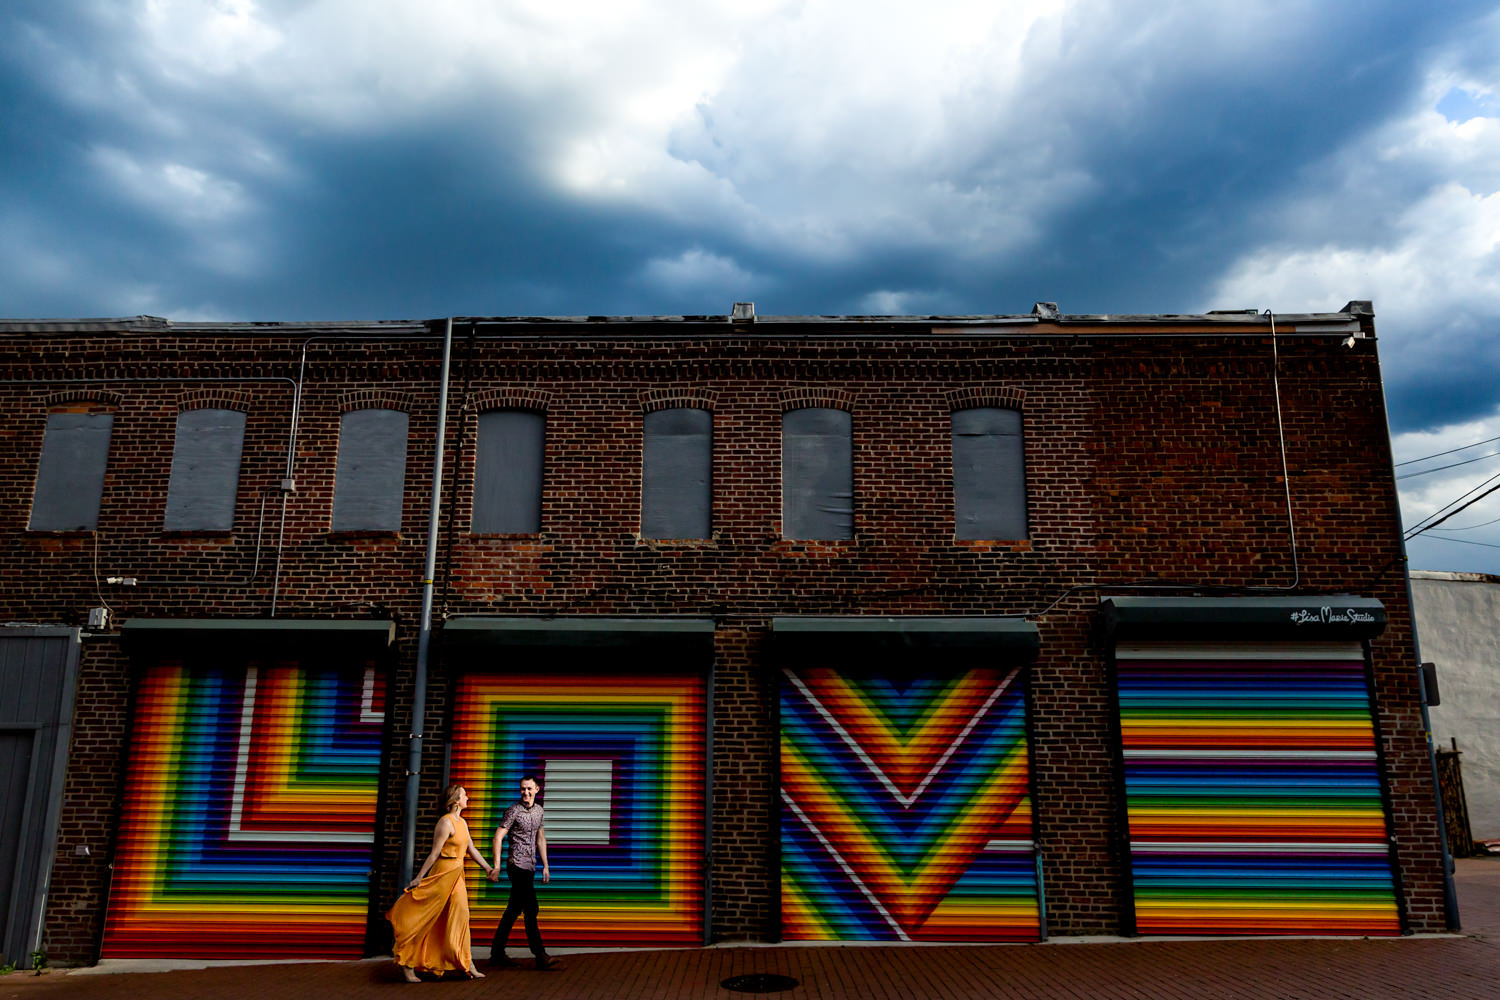 This is an engagement session at the ever loved love mural in Blagdon Alley in Washington DC, It was about to storm and the sky was dark but the sun poked out just for a few seconds and lit our couple as they walked past the love mural, It was windy too which added to the drama of the image, This is a modern fine art portrait, Procopio Photography, best top Washington DC photographer, best top Maryland photographer, best top Virginia photographer, best top DMV photographer, best top wedding photographer, best top commercial photographer, best top portrait photographer, best top boudoir photographer, modern fine art portraits, dramatic, unique, different, bold, editorial, photojournalism, award winning photographer, published photographer, memorable images, be different, stand out, engagement photography